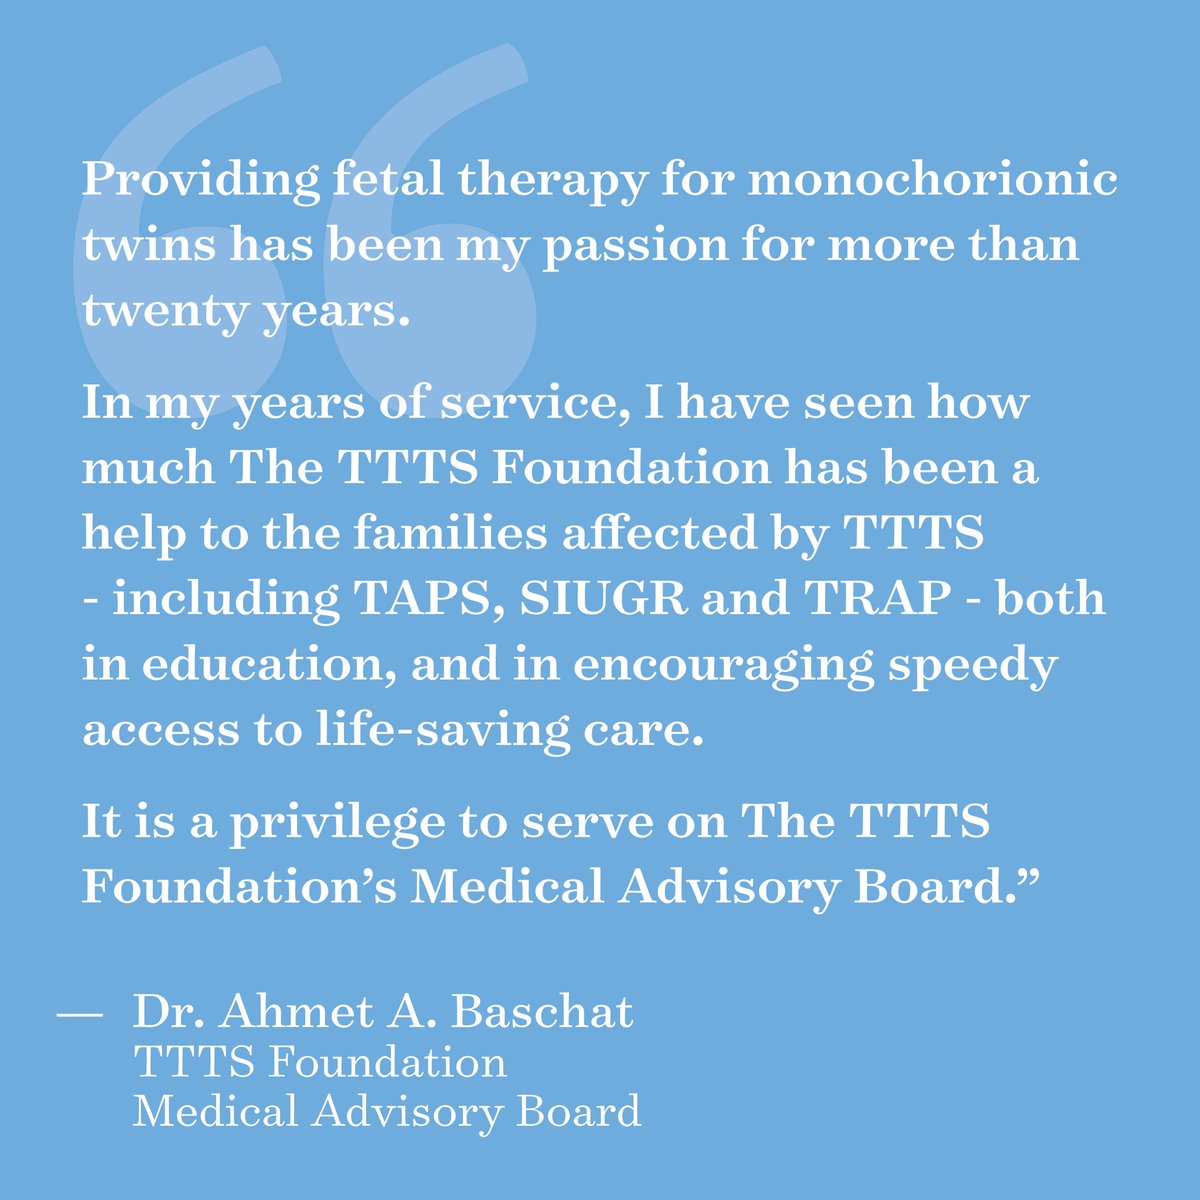 Meet The TTTS Foundation’s Medical Advisory Board Introducing Dr. Ahmet A. Baschat Director, Johns Hopkins Center for Fetal Therapy #TTTS #tttsfoundation #fetaltherapy #fetalsurgery #fetalmedicine #placenta #twintotwintransfusionsyndrome #siugr #twinanemiapolycythemiasequence